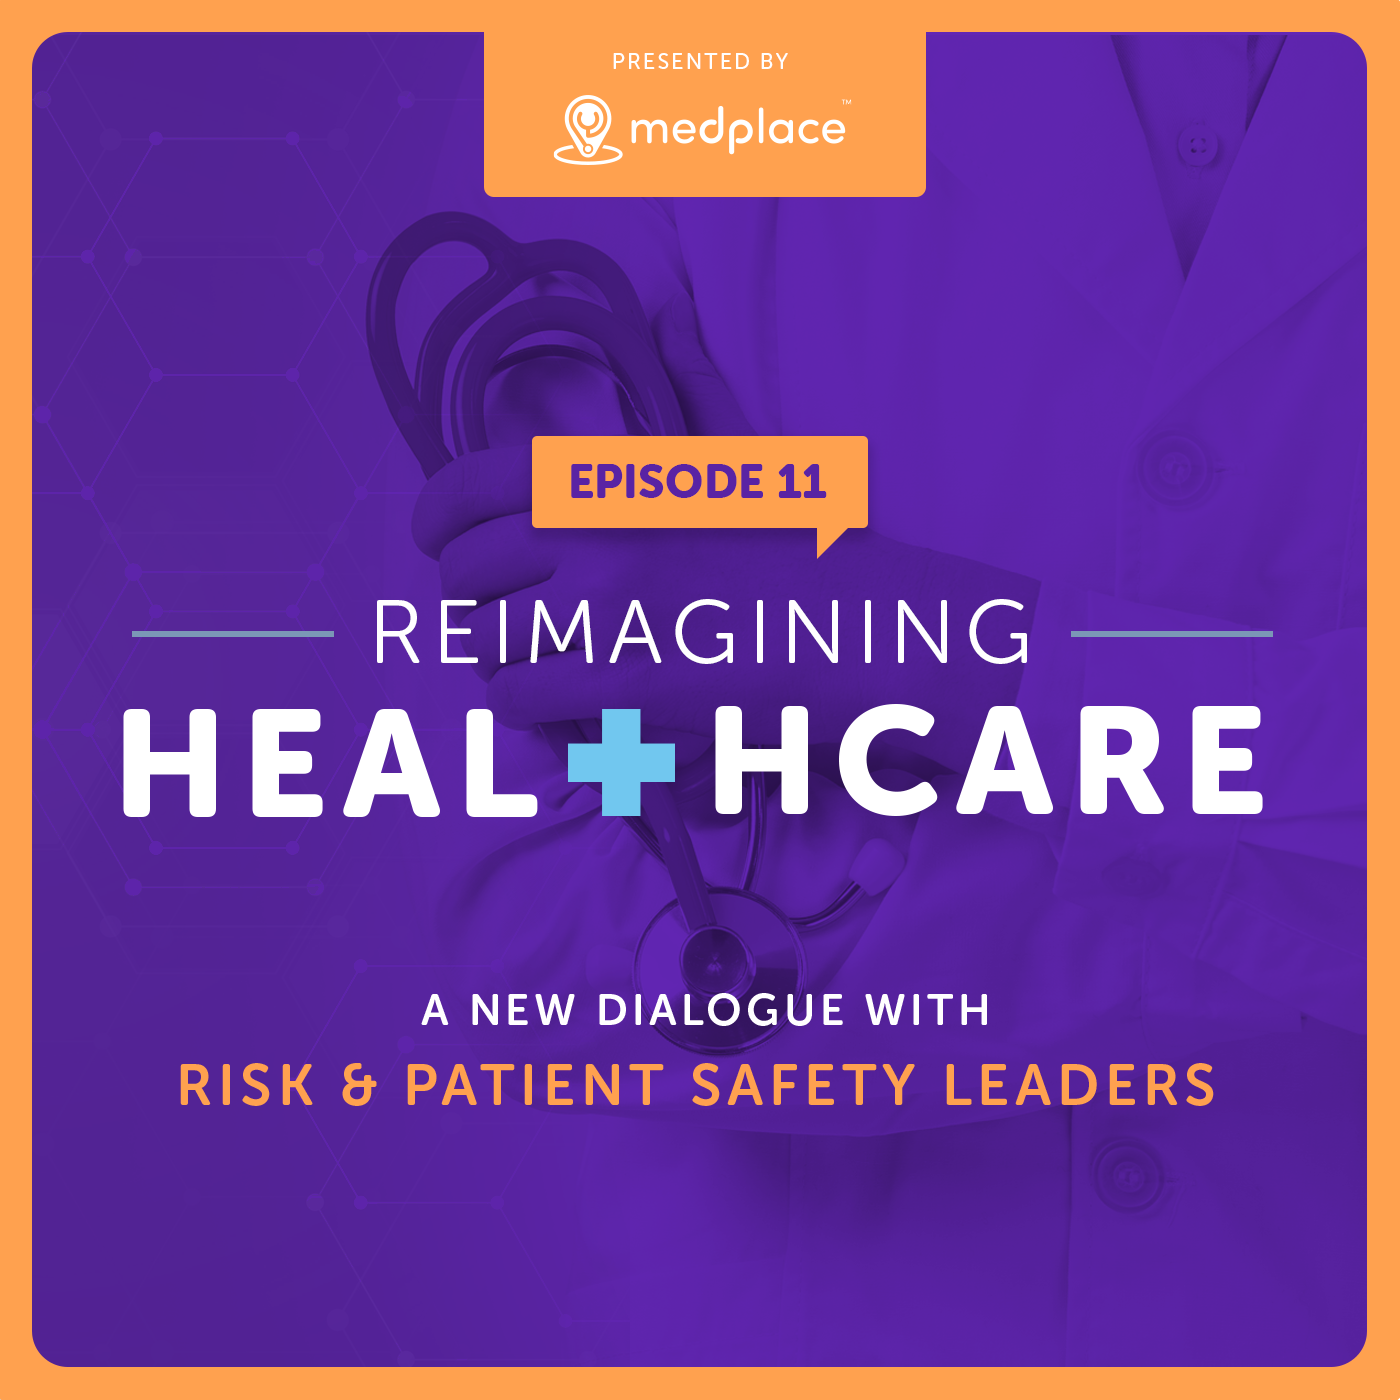 Episode 11 - Reimagining Healthcare - A New Dialogue with Risk and Patient Safety Leaders